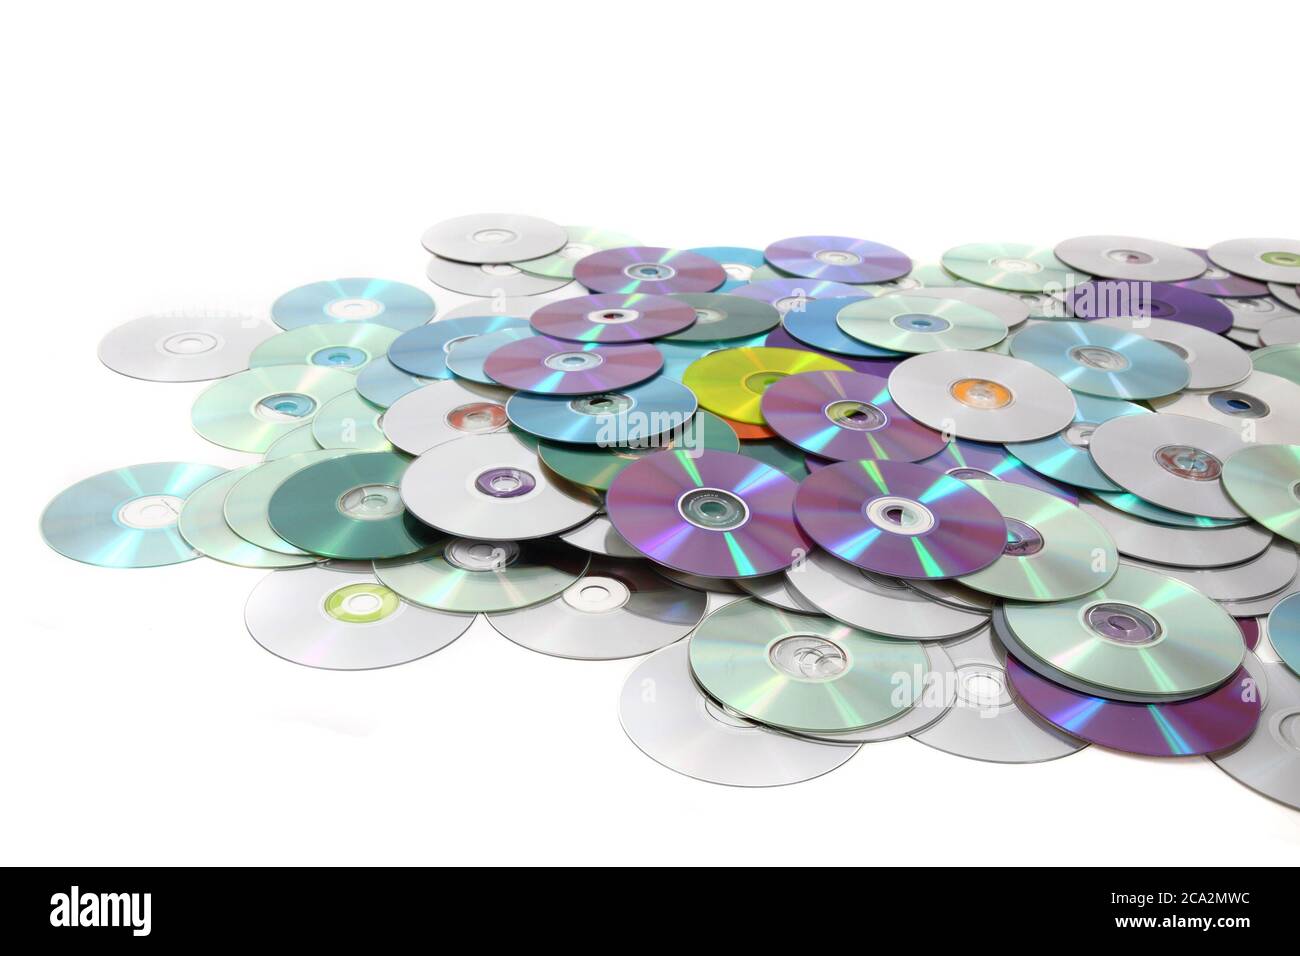 CD and DVD as very nice technology background Stock Photo